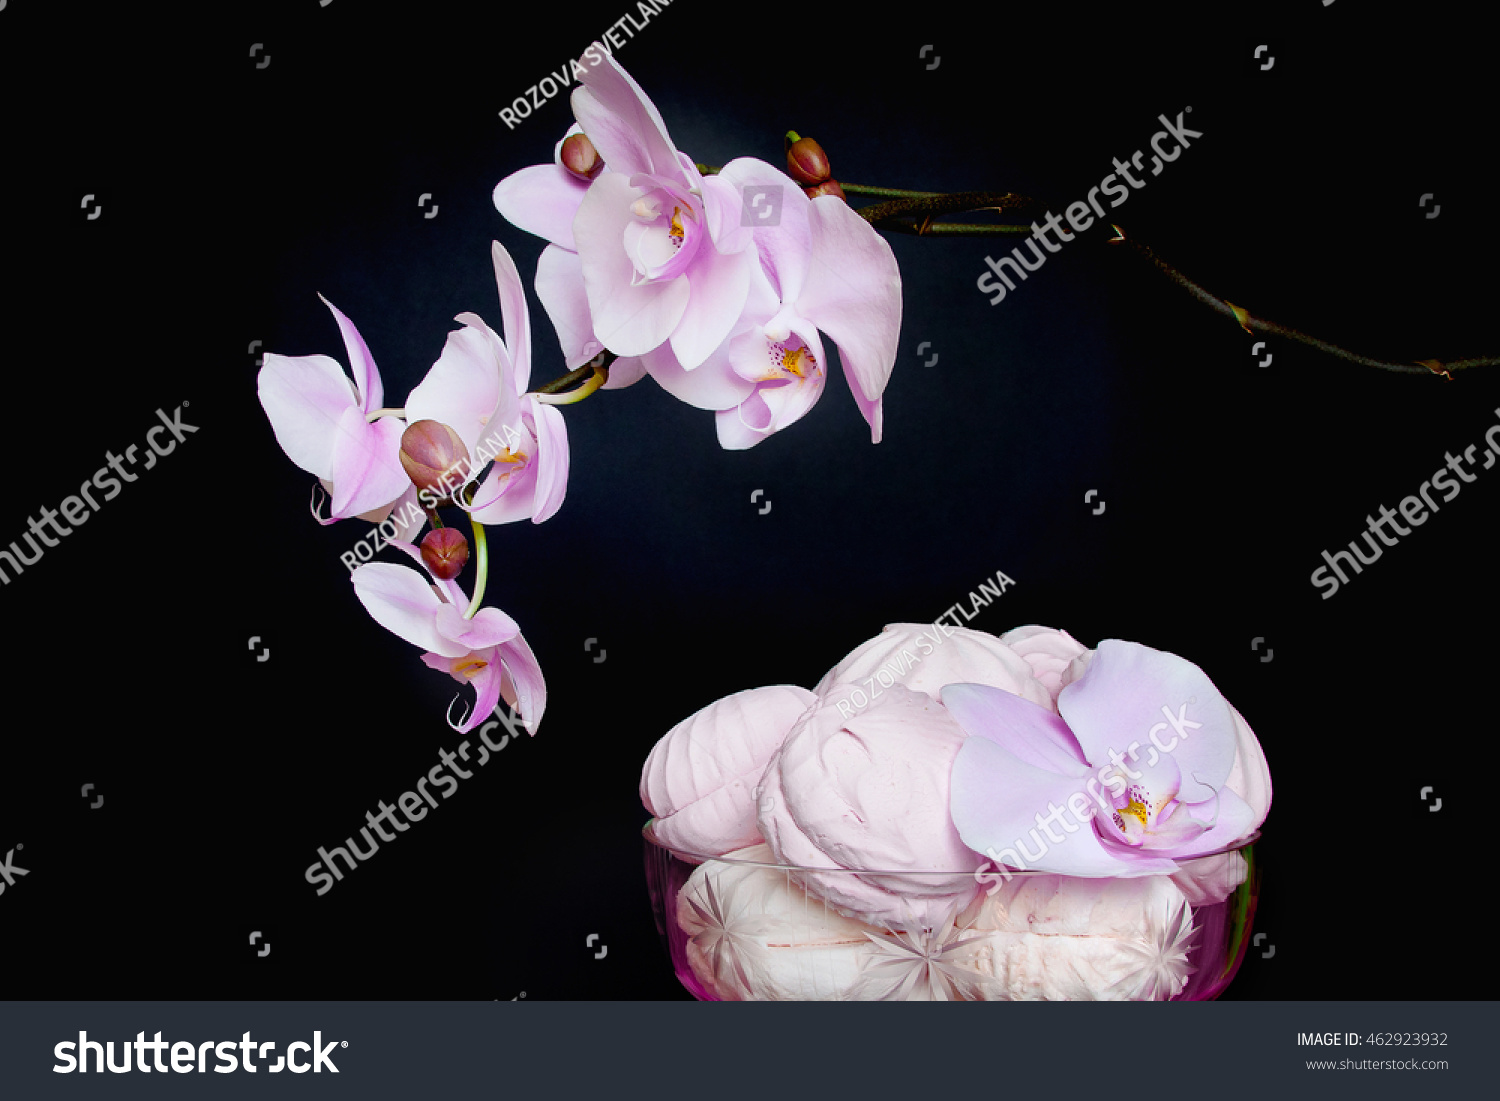 The Phalaenopsis Orchid and marshmallows in a glass vase. Pink and white still life on black background. Valentine's day holiday. composition #462923932